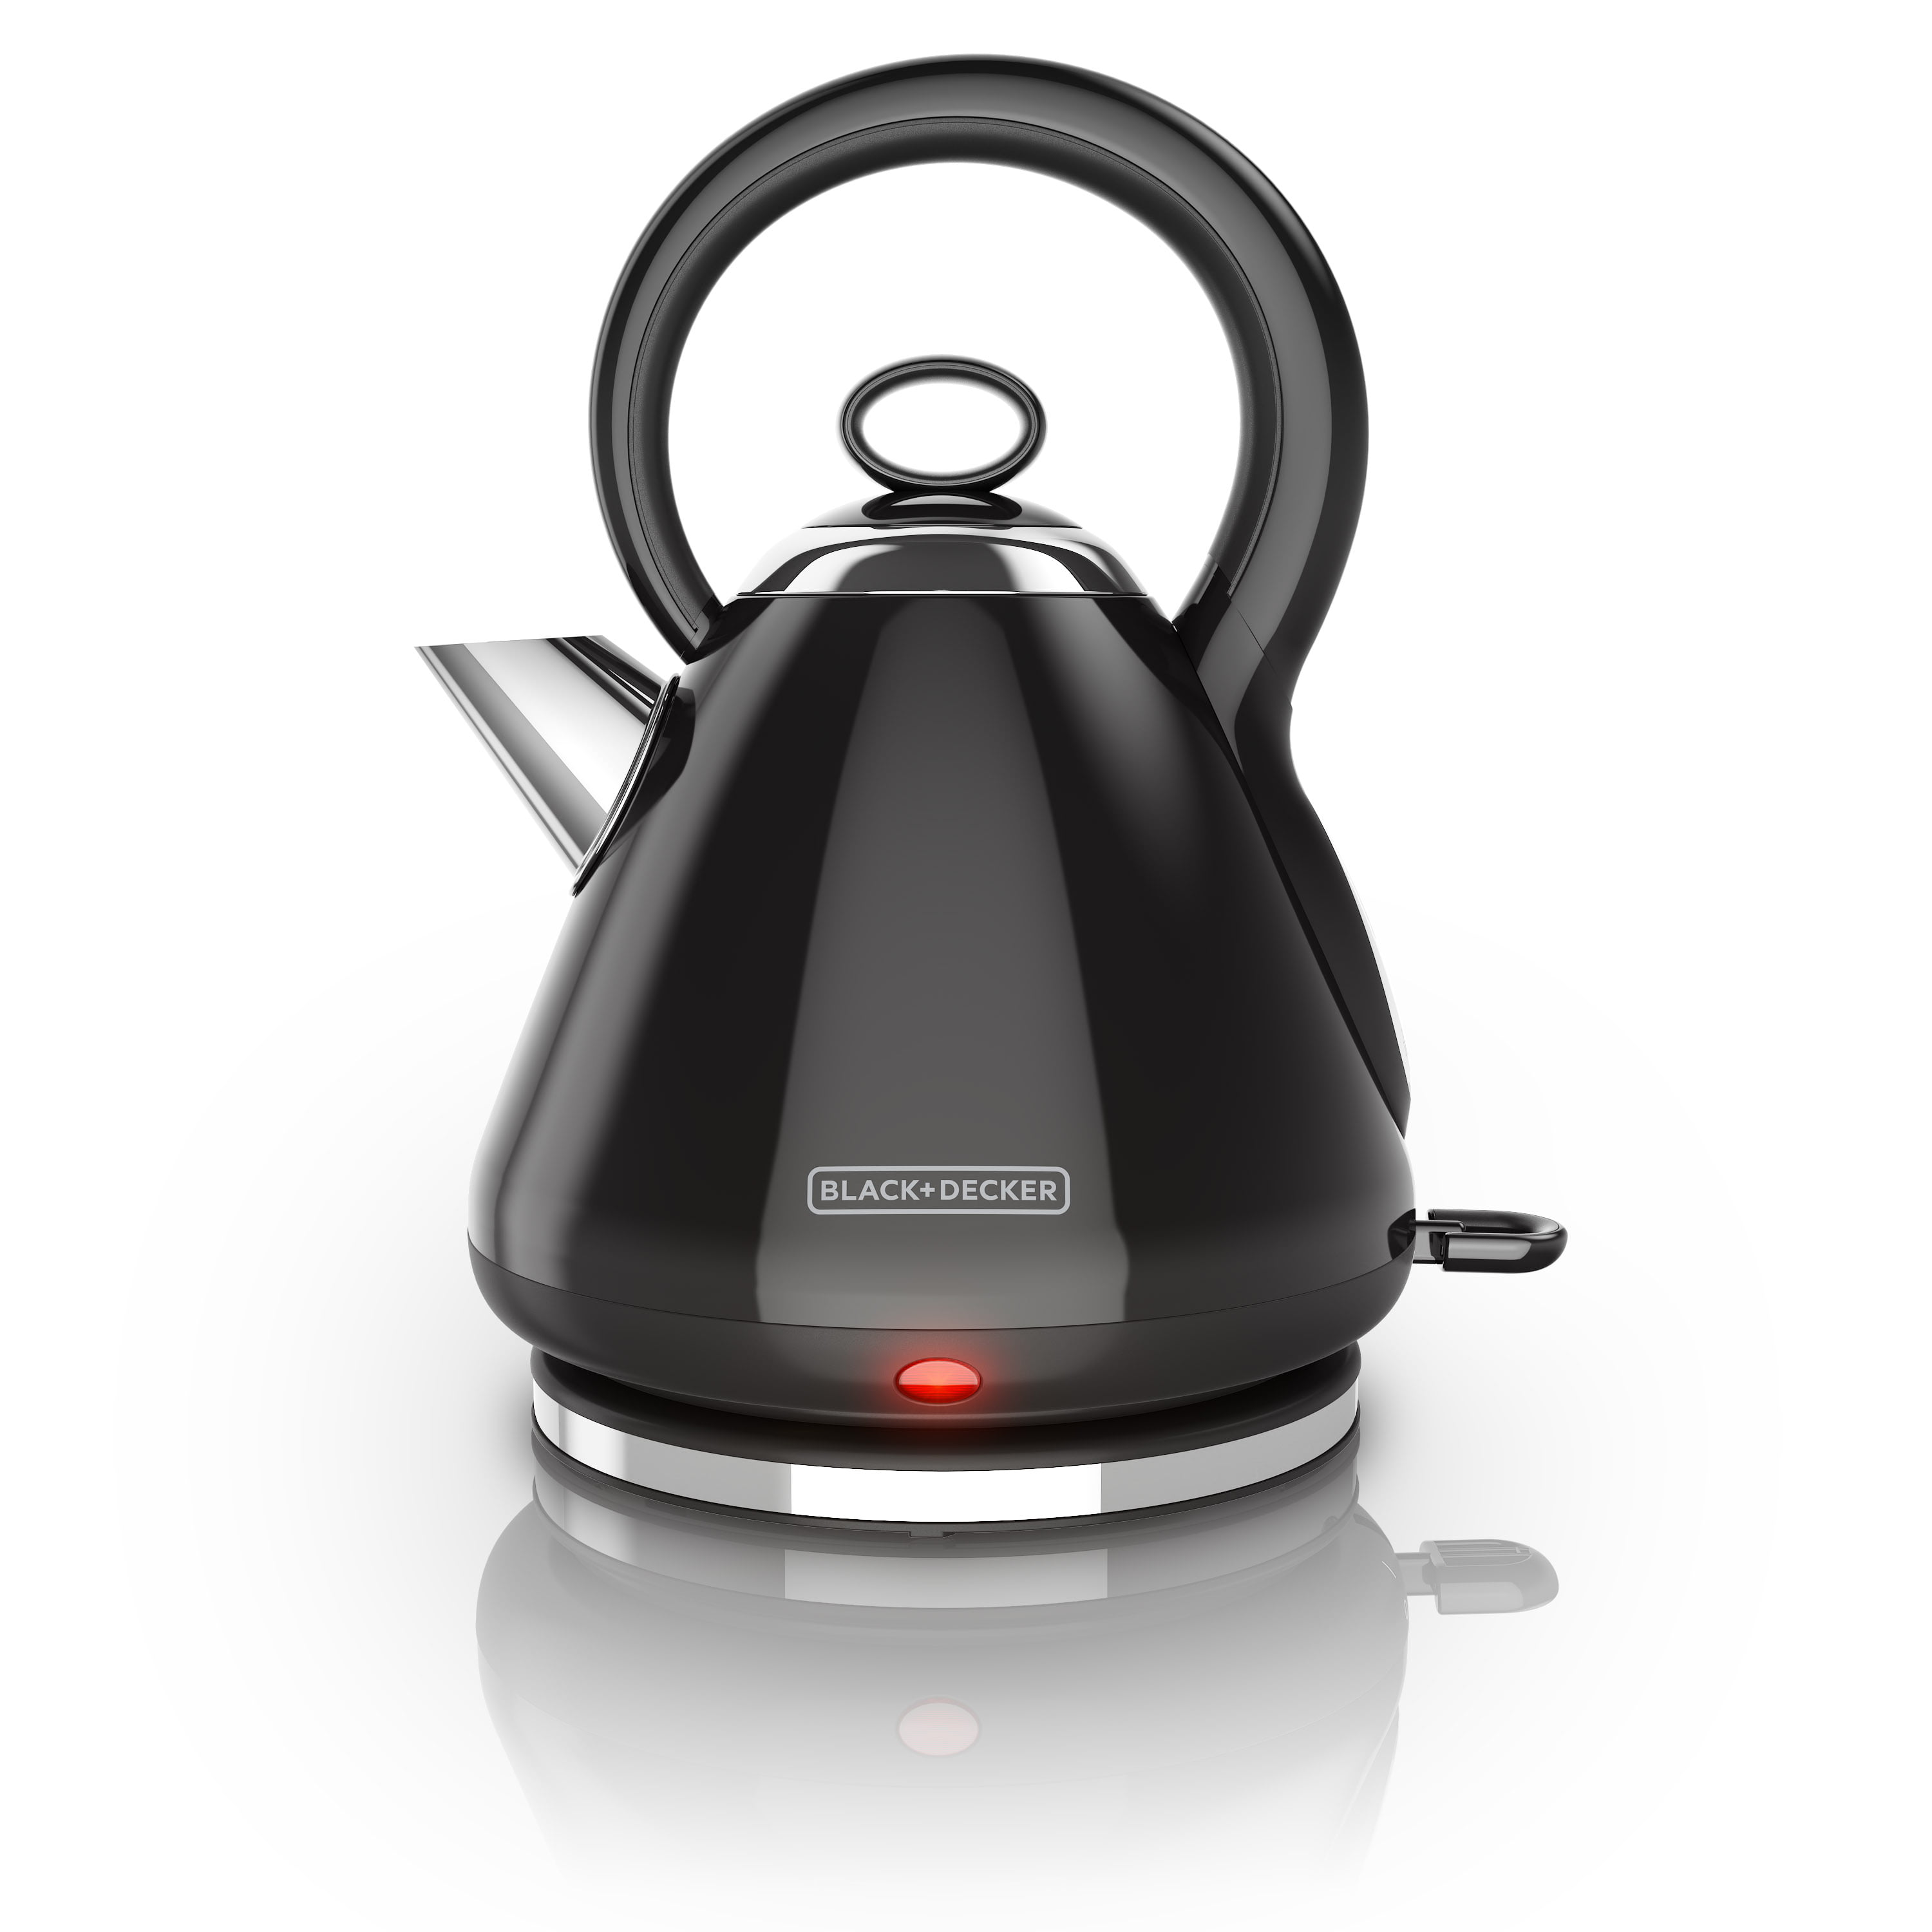 Black And Decker Electric Kettle 8901 0 Disassembly - iFixit Repair Guide